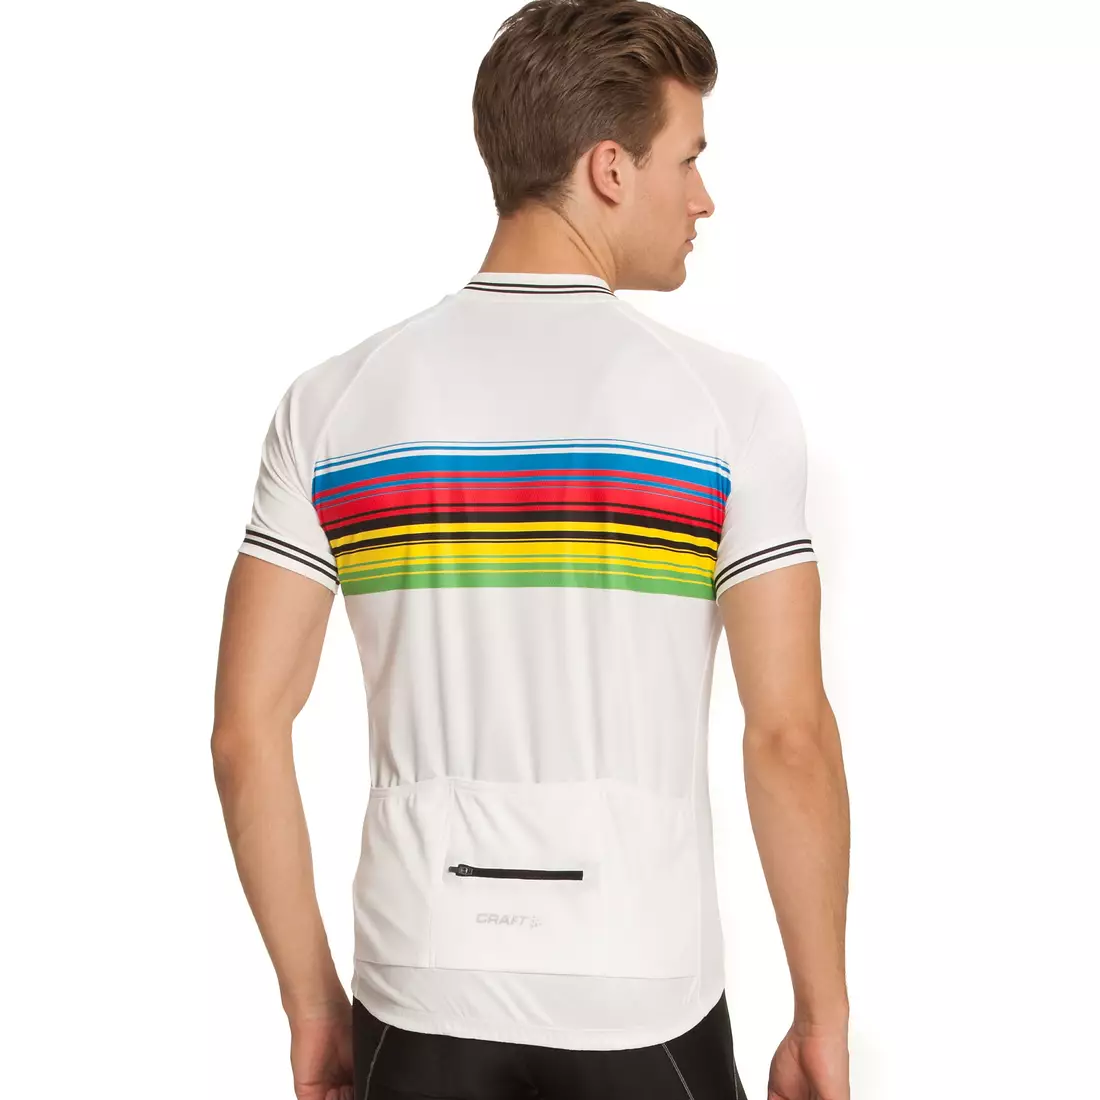 CRAFT ACTIVE BIKE CHAMP men's cycling jersey 1902583-2900, color: white